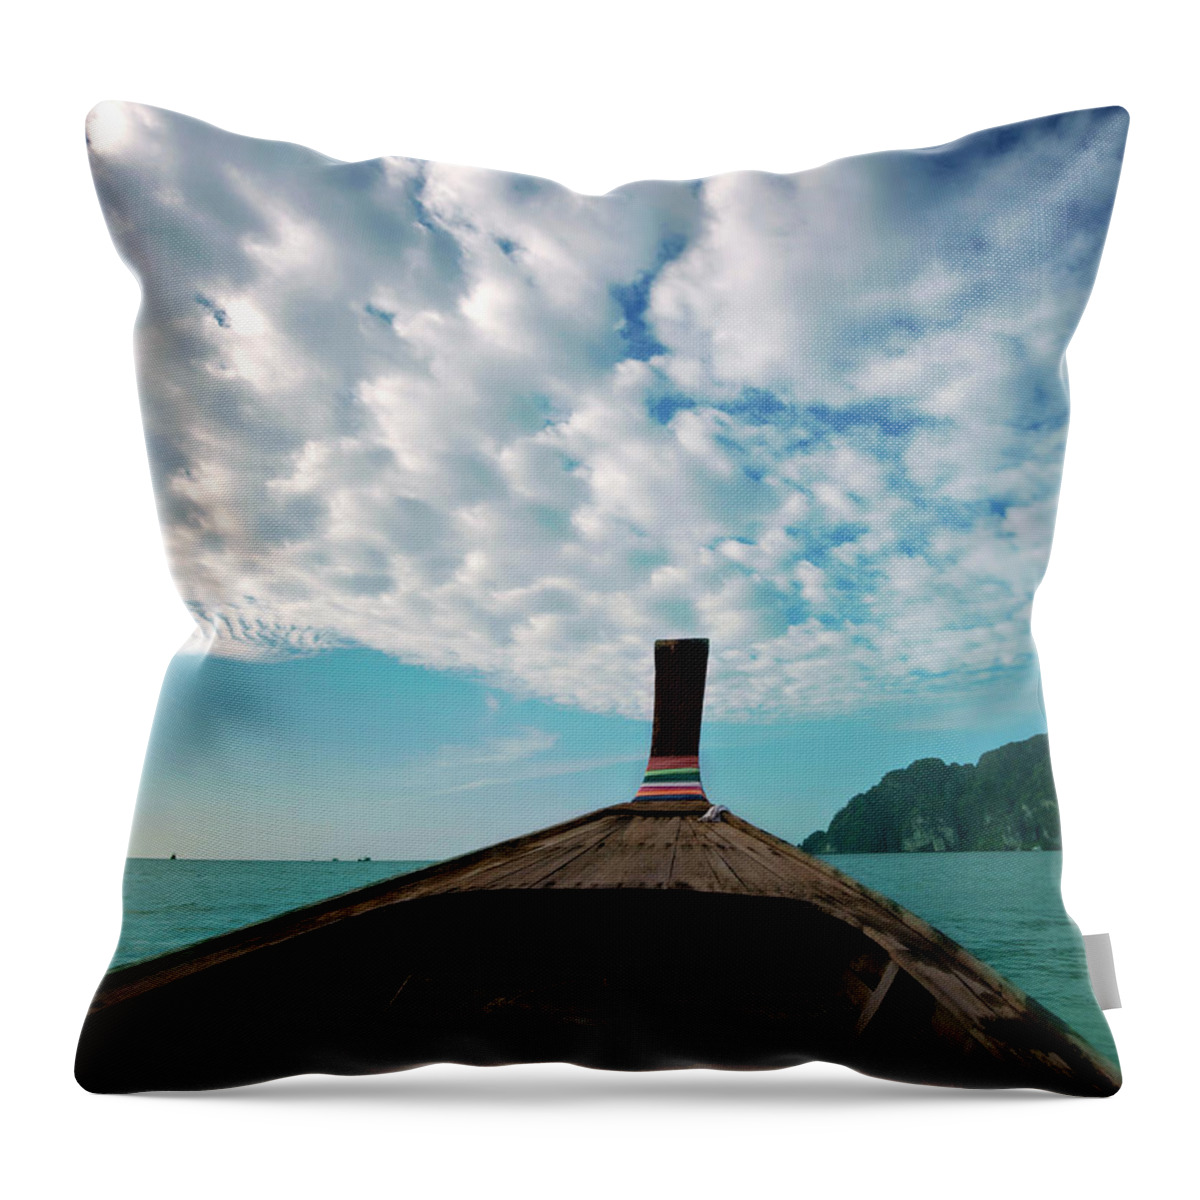 Tranquility Throw Pillow featuring the photograph Long Boat In Andaman Sea by Sharon Lapkin